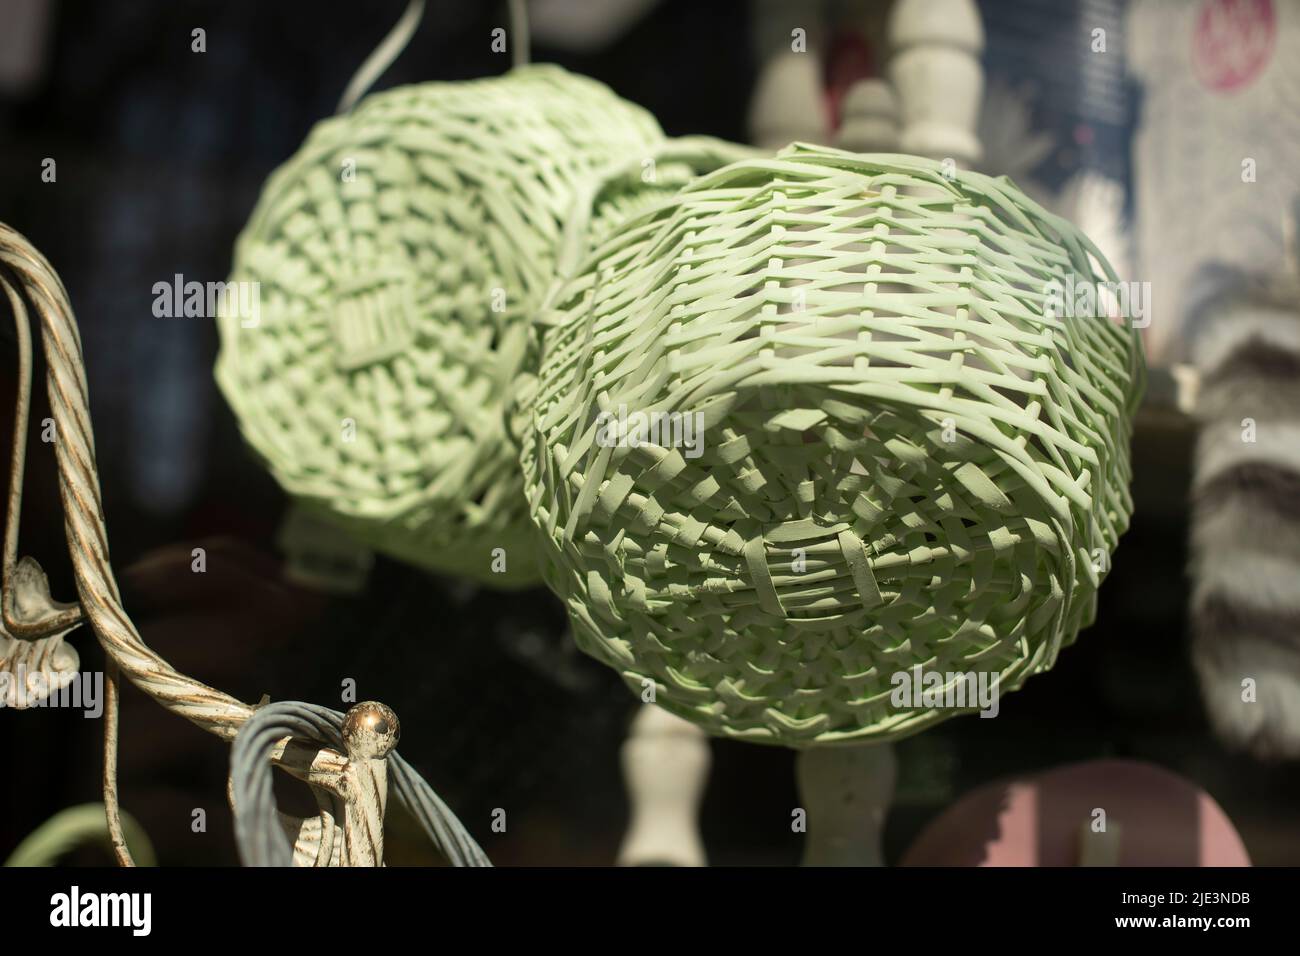 Green wicker basket. Interior details. Basket woven from dry plants. Stock Photo